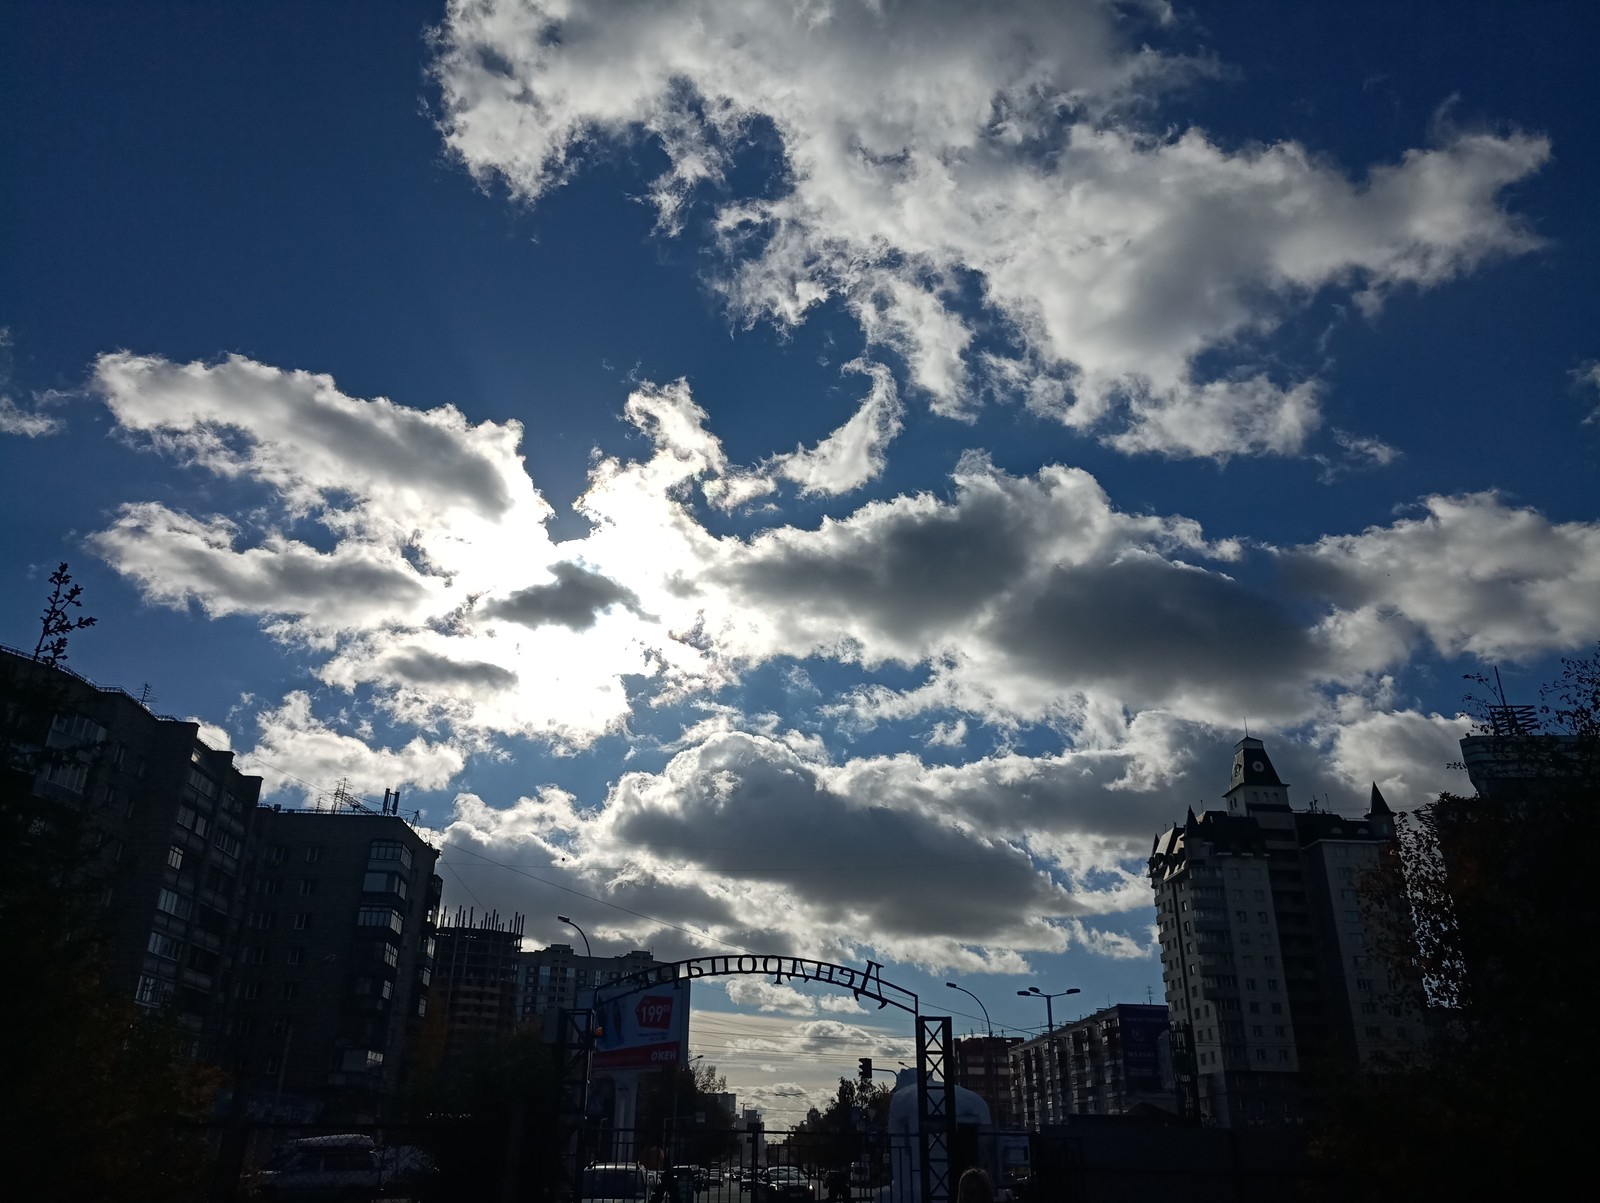 How do you like the photo with the sky? (without filters) - My, Sky, The photo, beauty